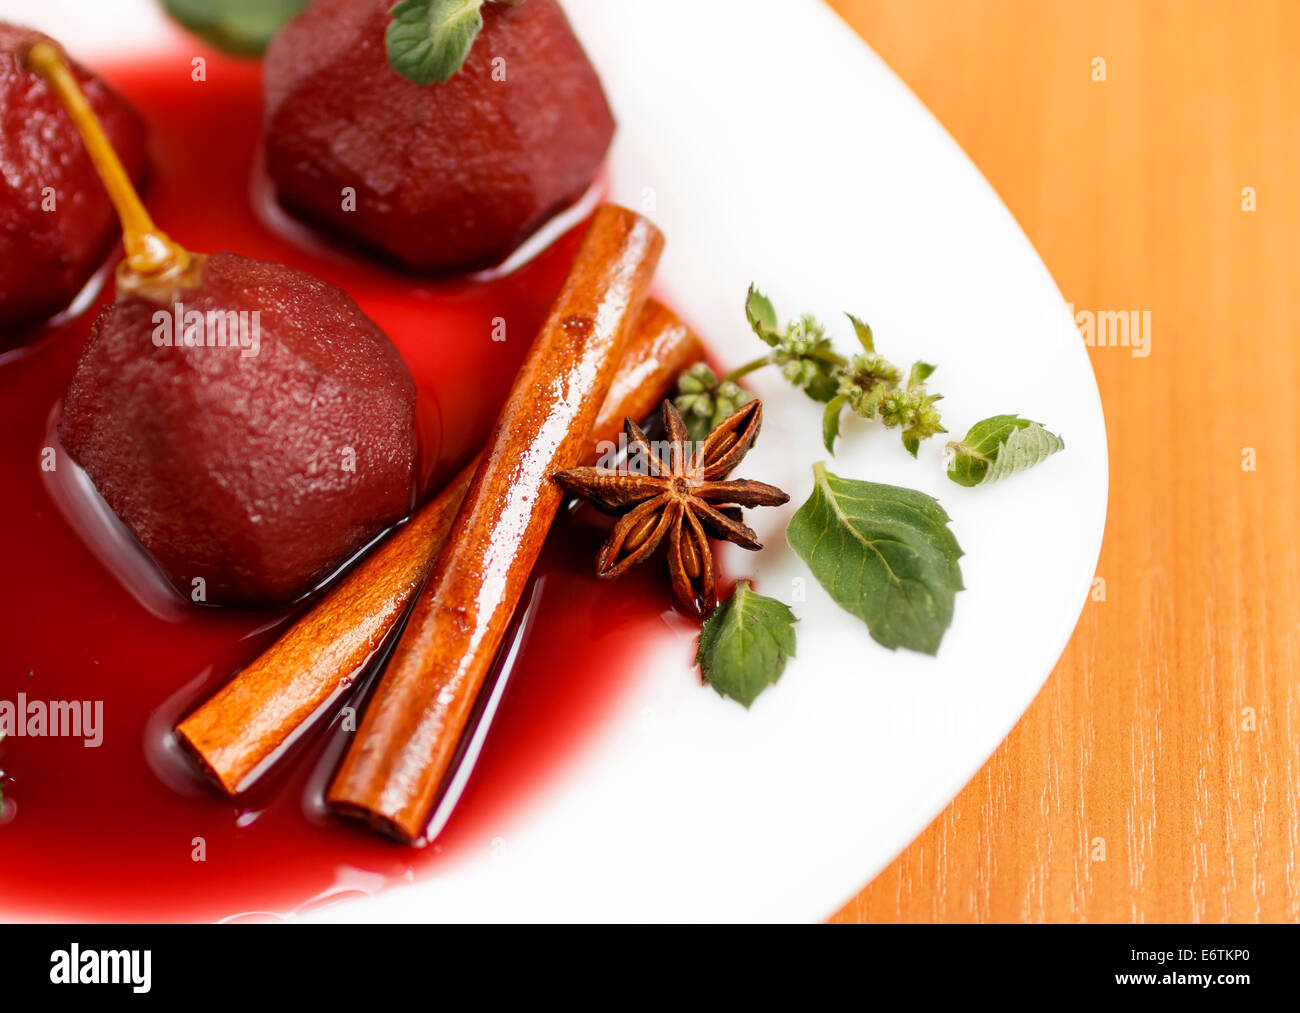 cinnamon sticks and star anise in fruity dessert, pears in red wine Stock Photo